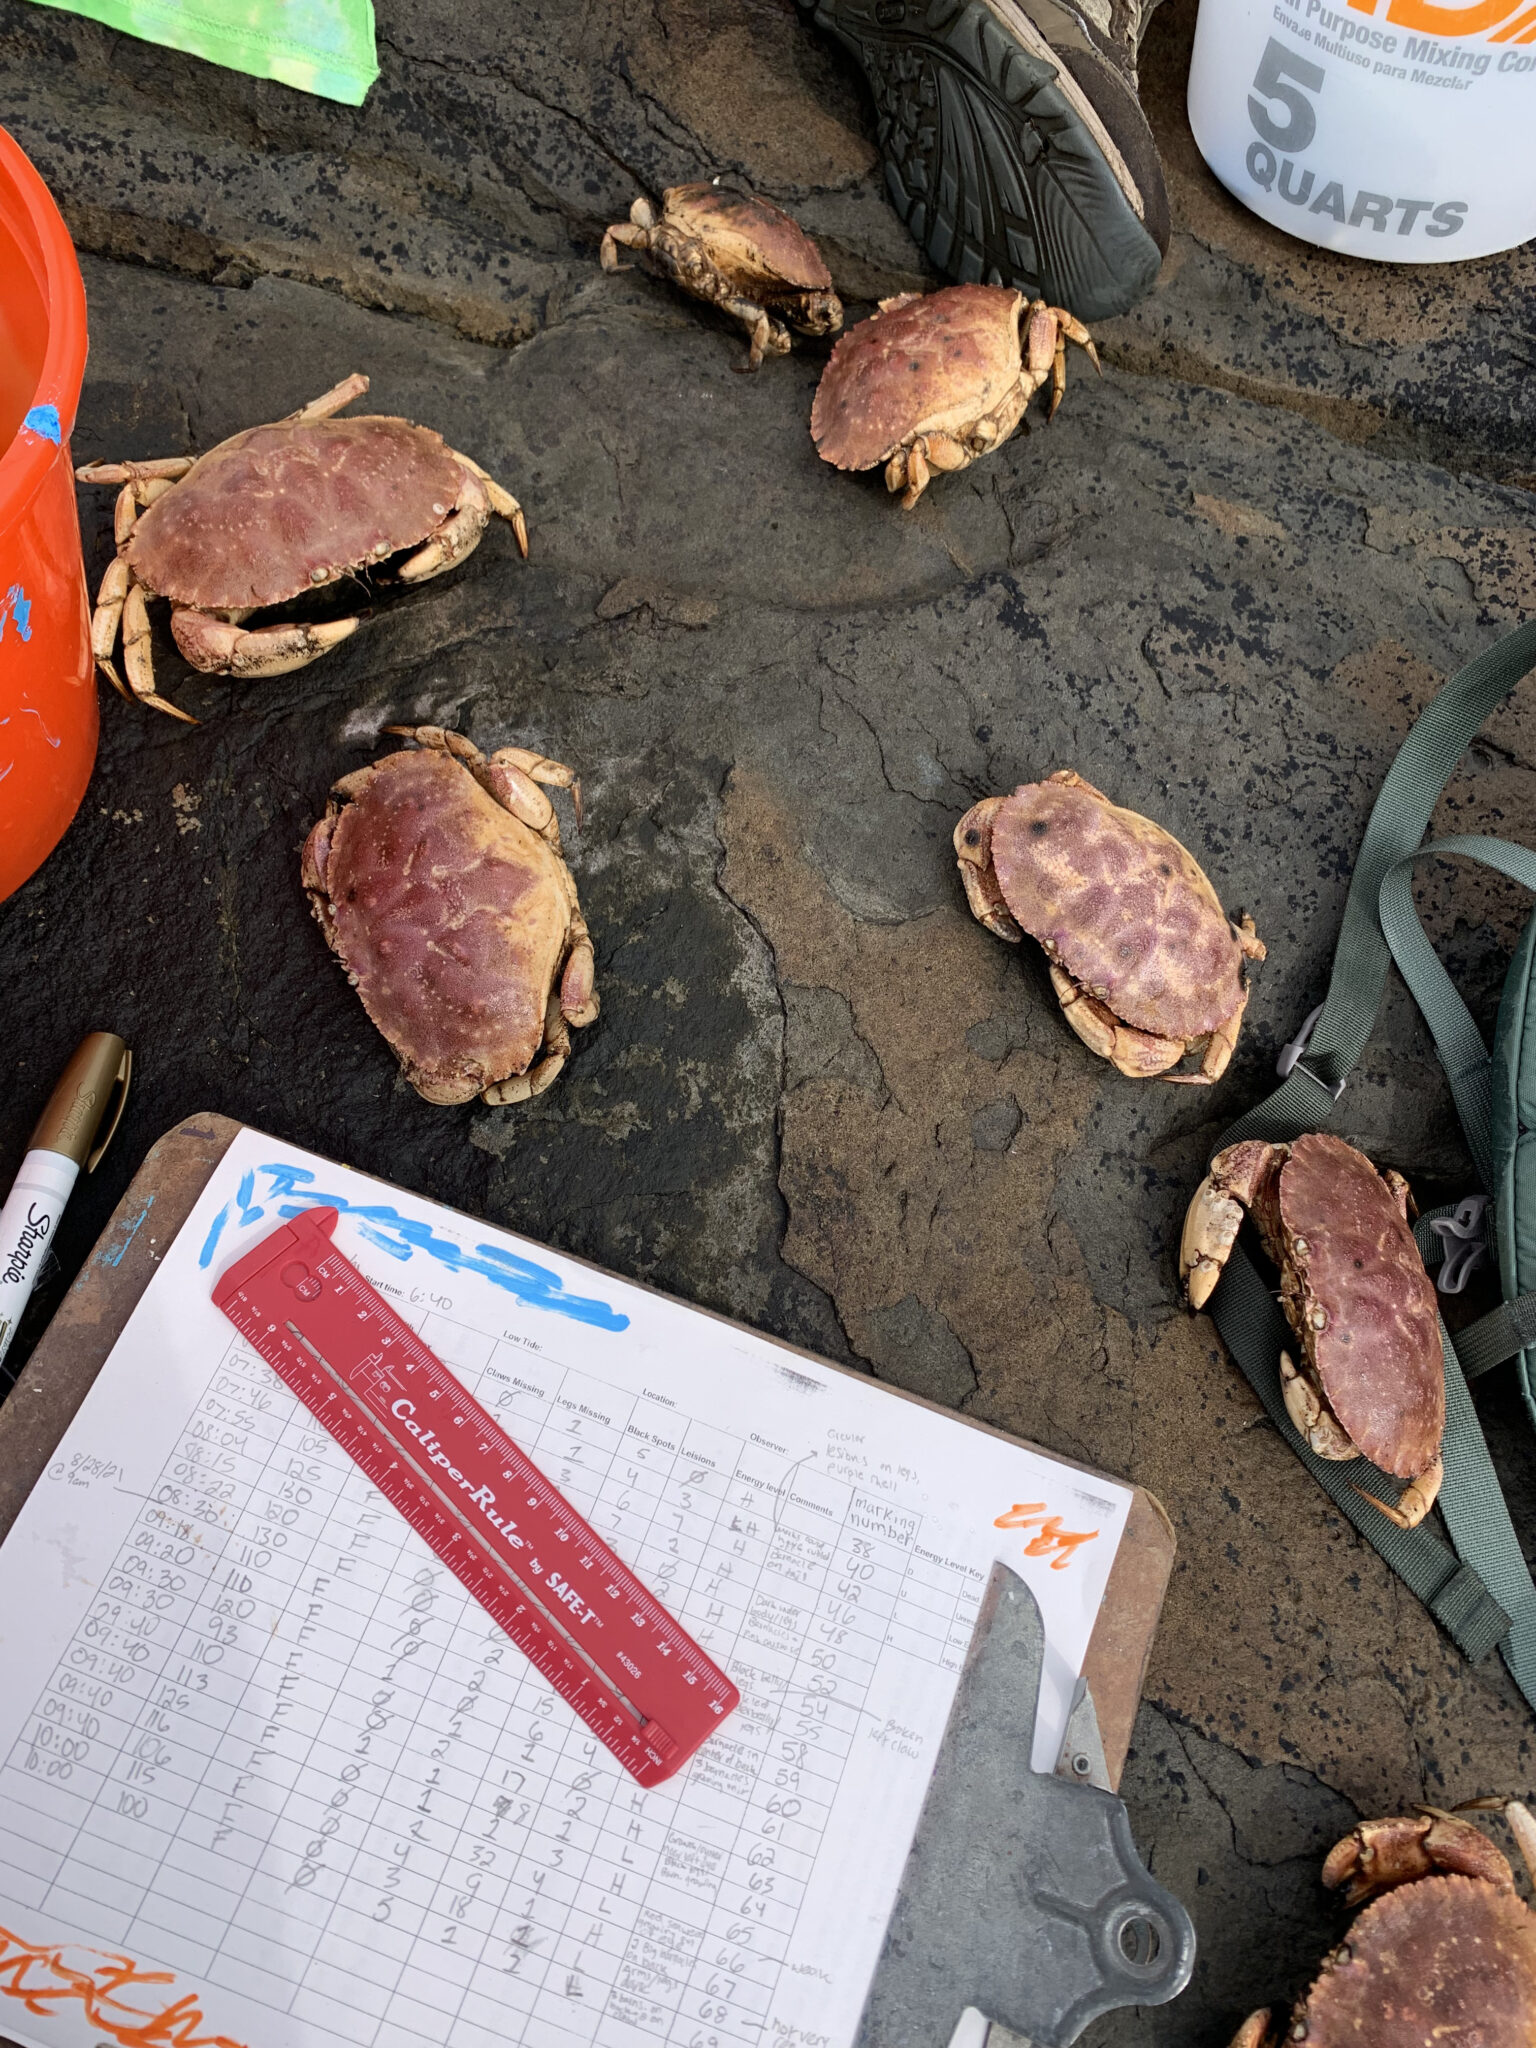 Seven crabs resting on wet rock surrounded by field equipment such as a bucket, clipboard with data sheet, and ruler.